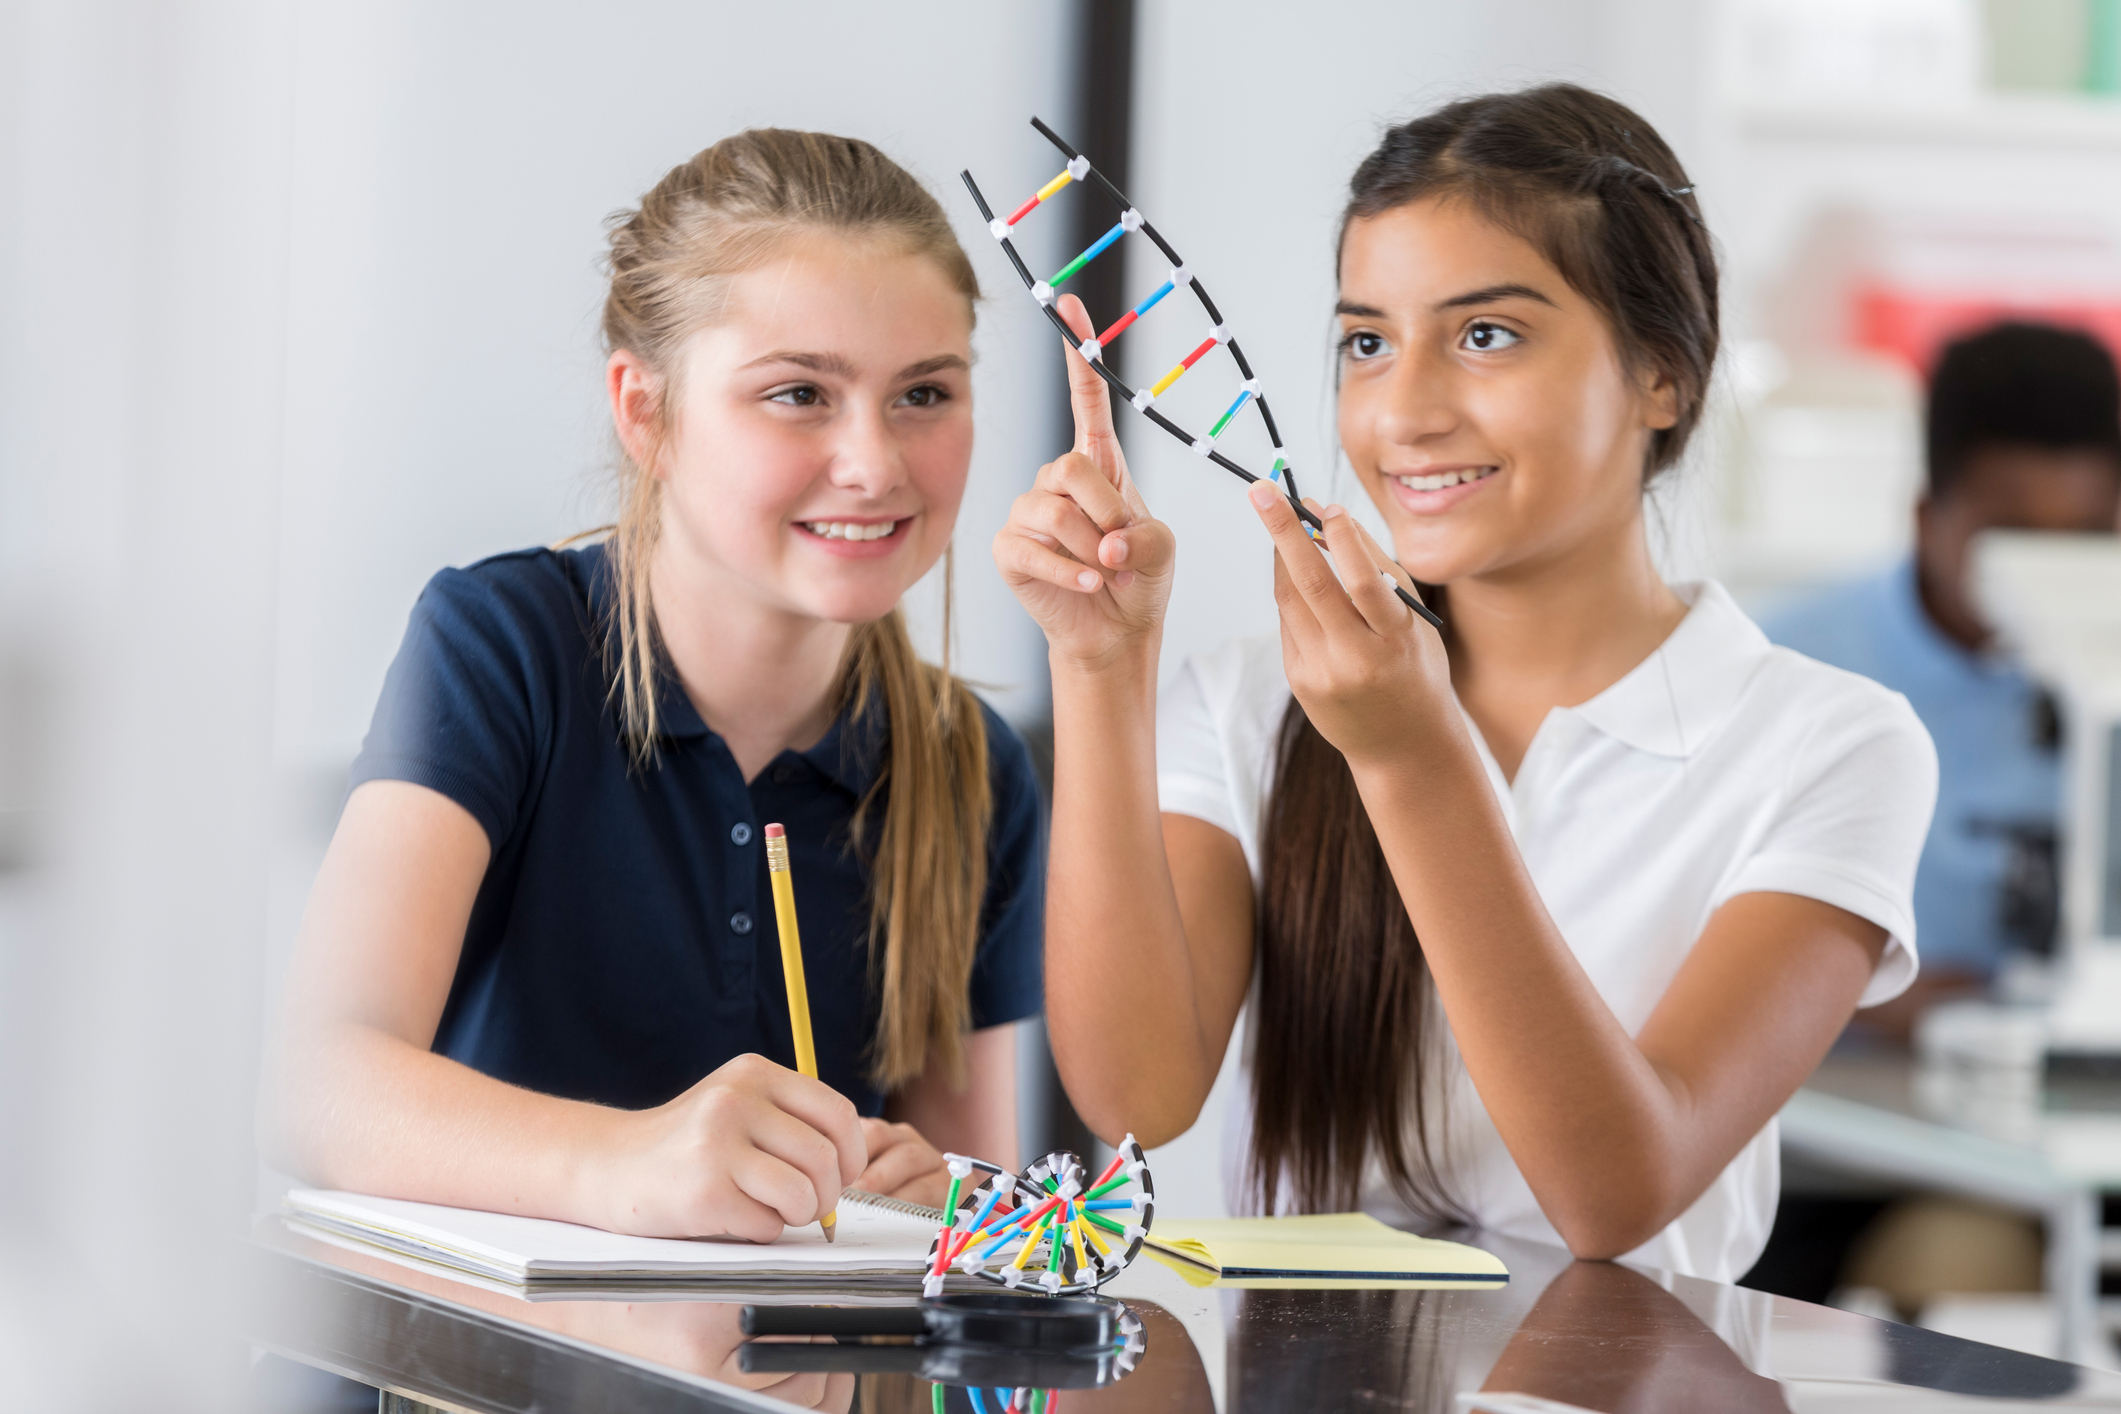 high school girls examine a DNA helix model. One of the students is pointing to something on the helix.